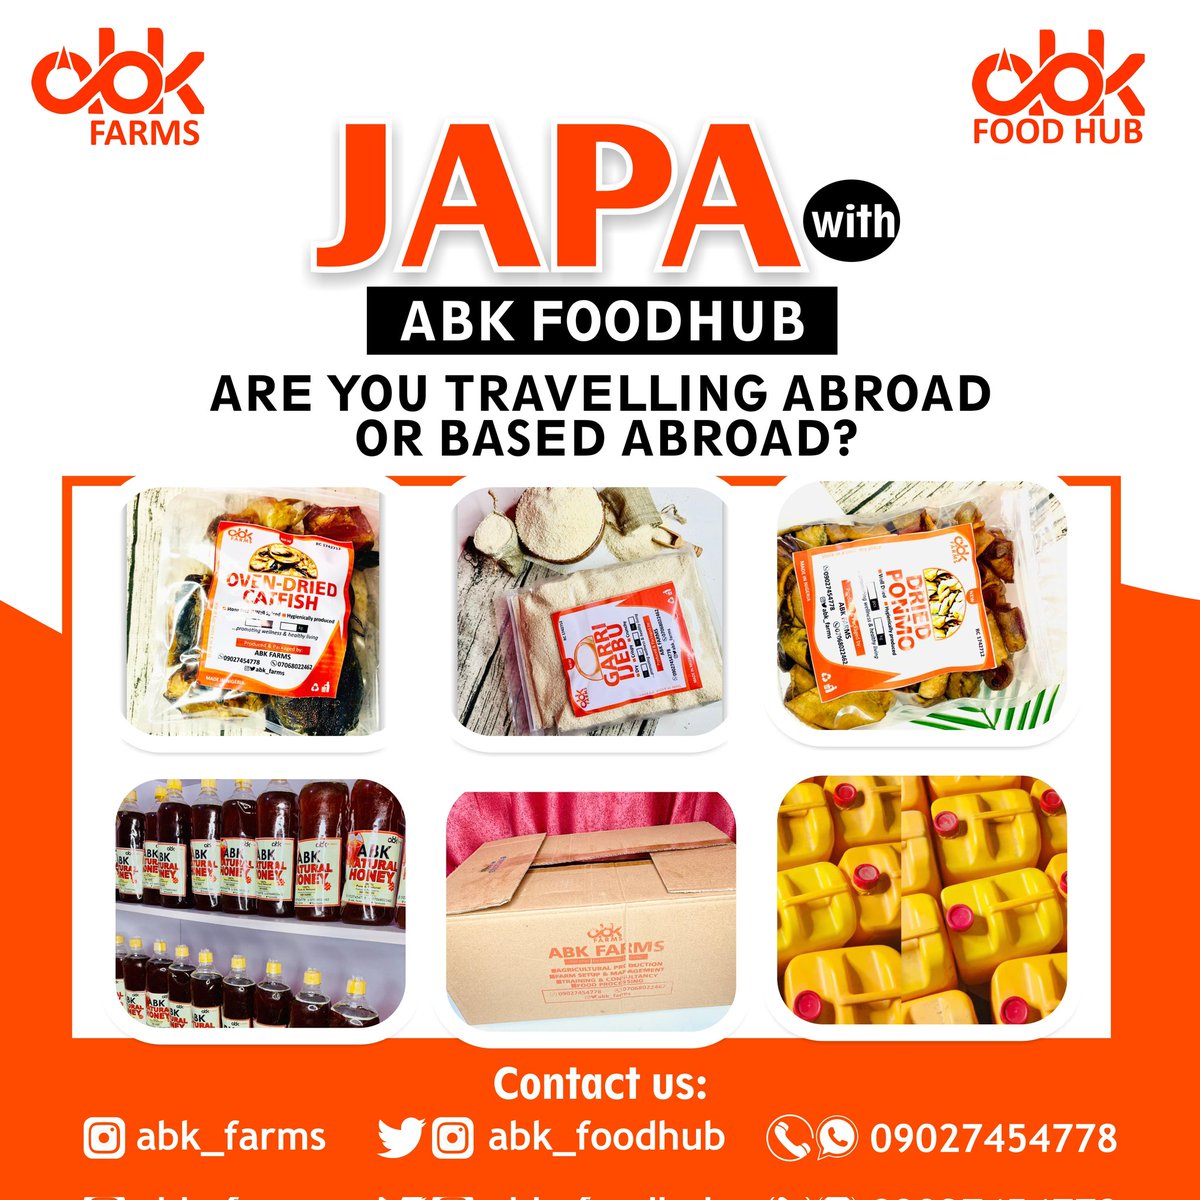 Are you a Nigerian travelling out of the country soon?
Or you reside abroad and need a plug for your processed foods?

We gat you at @abk_foodhub @abk_farms 

#japa #japafoods #nigeriansabroad